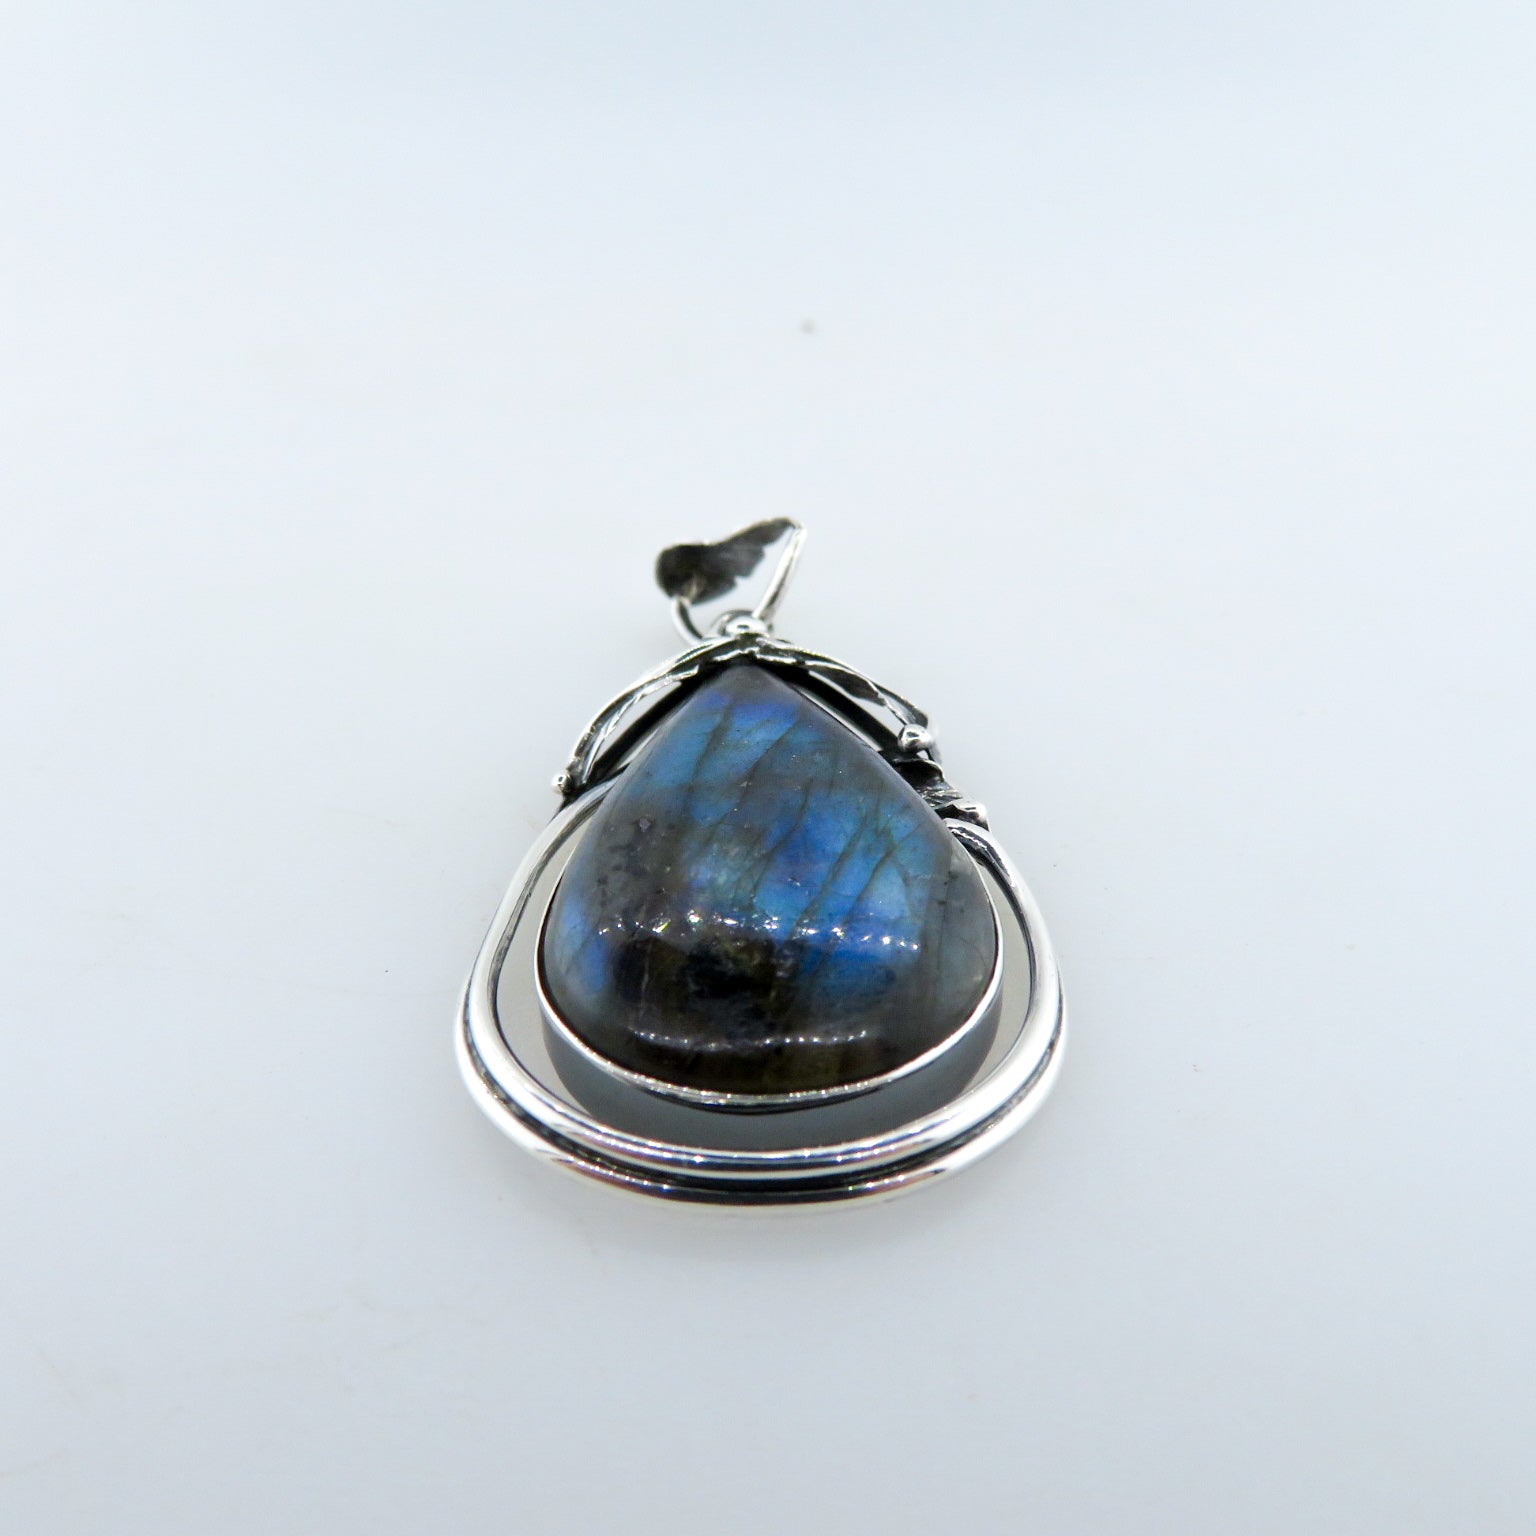 Labradorite Pendant with Sterling Silver